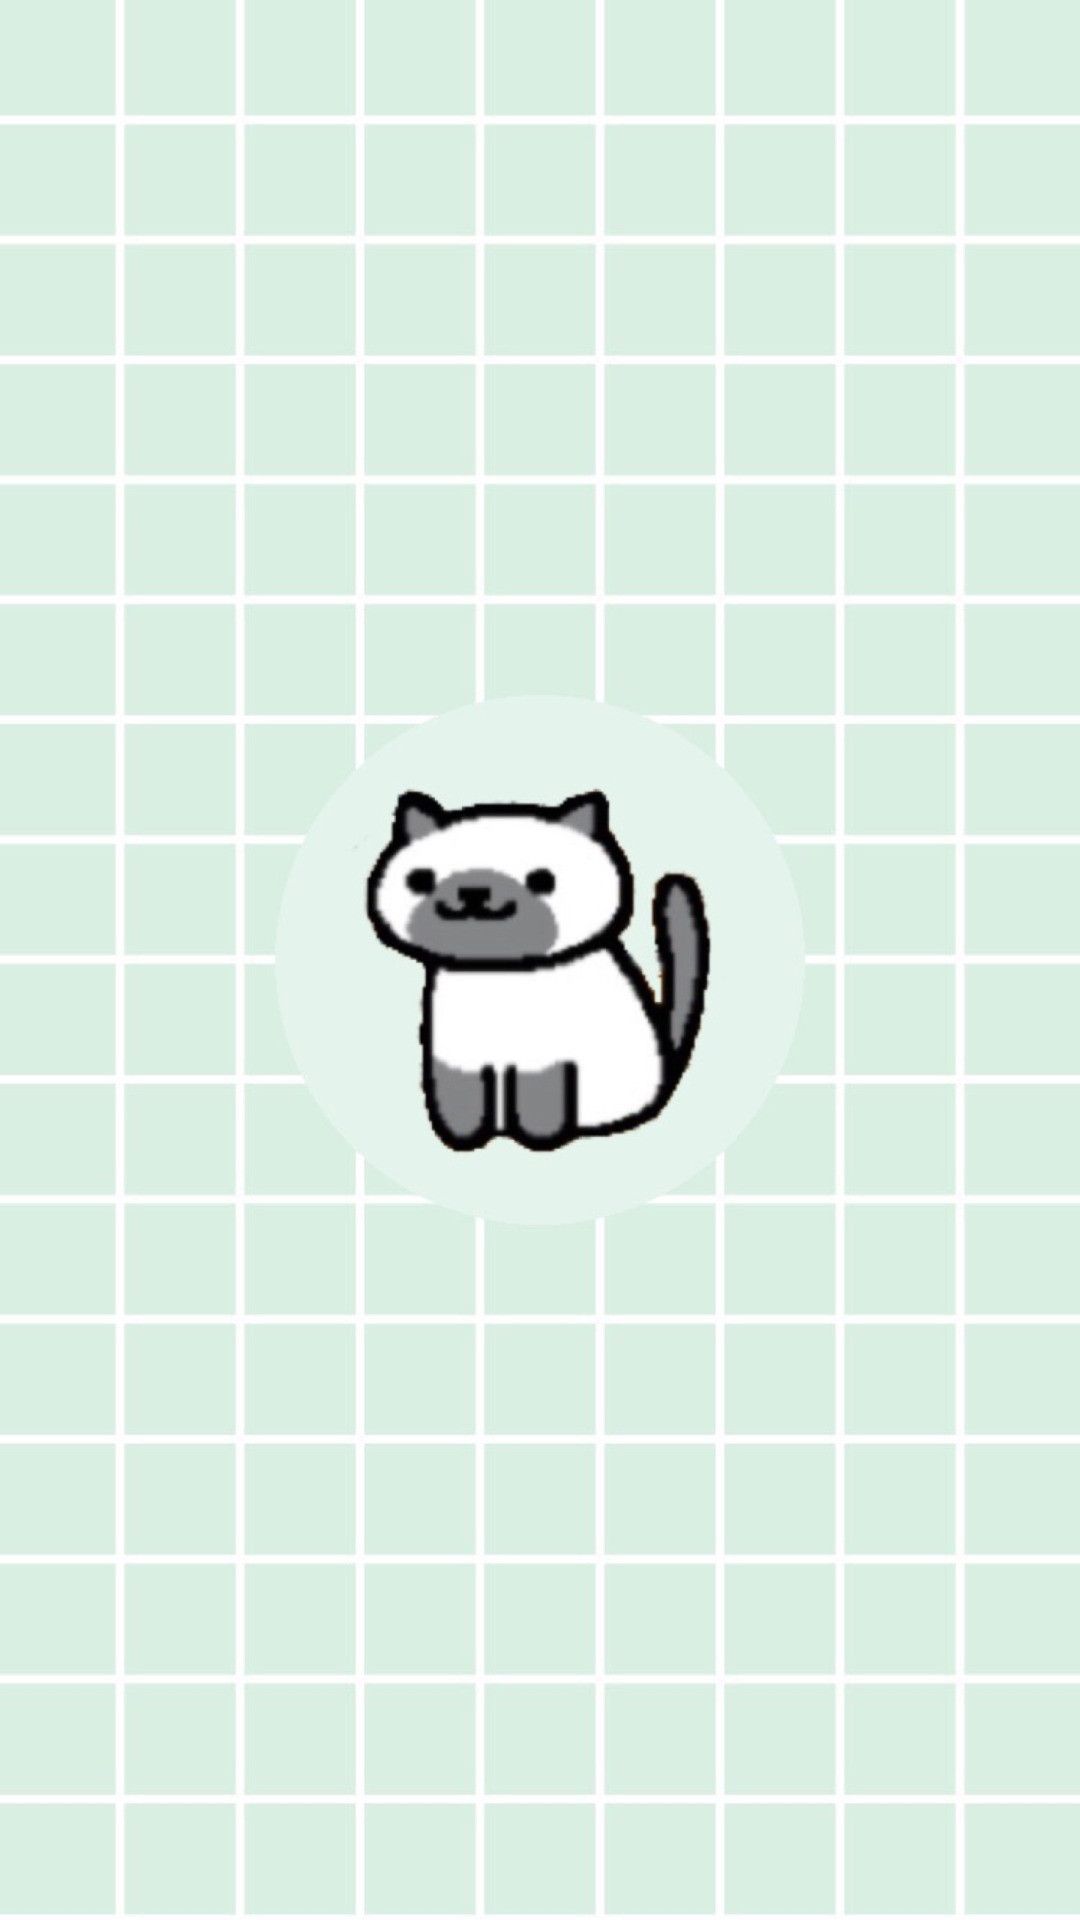 A cat on a grid background - Cat